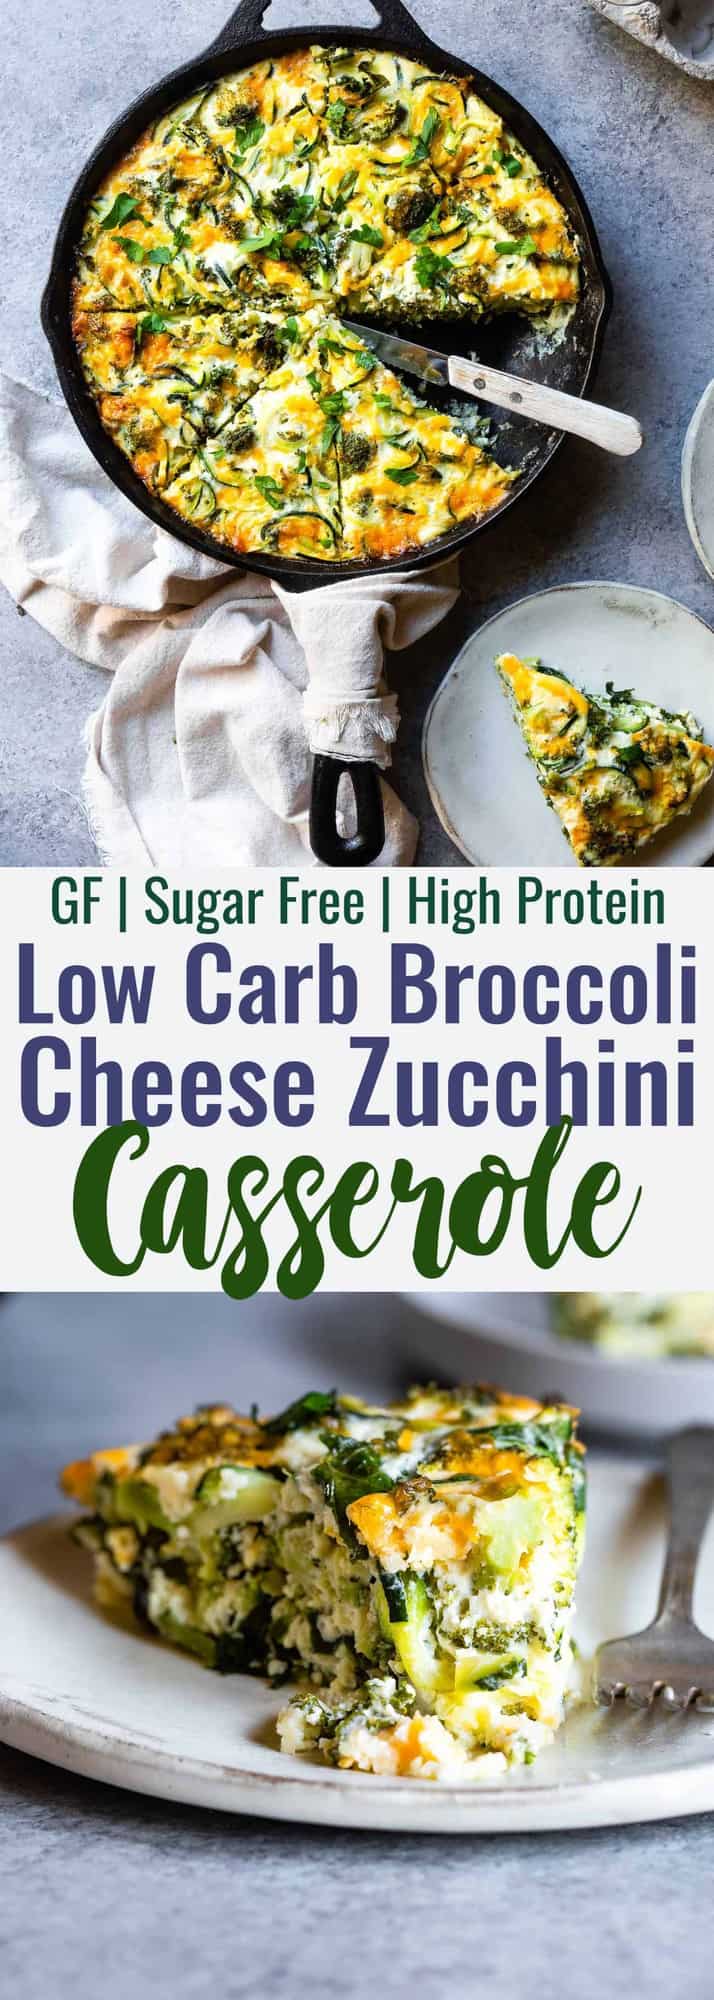 Baked Kale and Broccoli Cheesy Zucchini Casserole - This low carb, gluten free Healthy Baked Cheesy Zucchini Casserole is a quick, easy and healthy dinner that even your kids will love! Protein packed, only 1 Freestyle point and 167 calories too! | #Foodfaithfitness | #Lowcarb #Keto #Glutenfree #Spiralized #Healthy